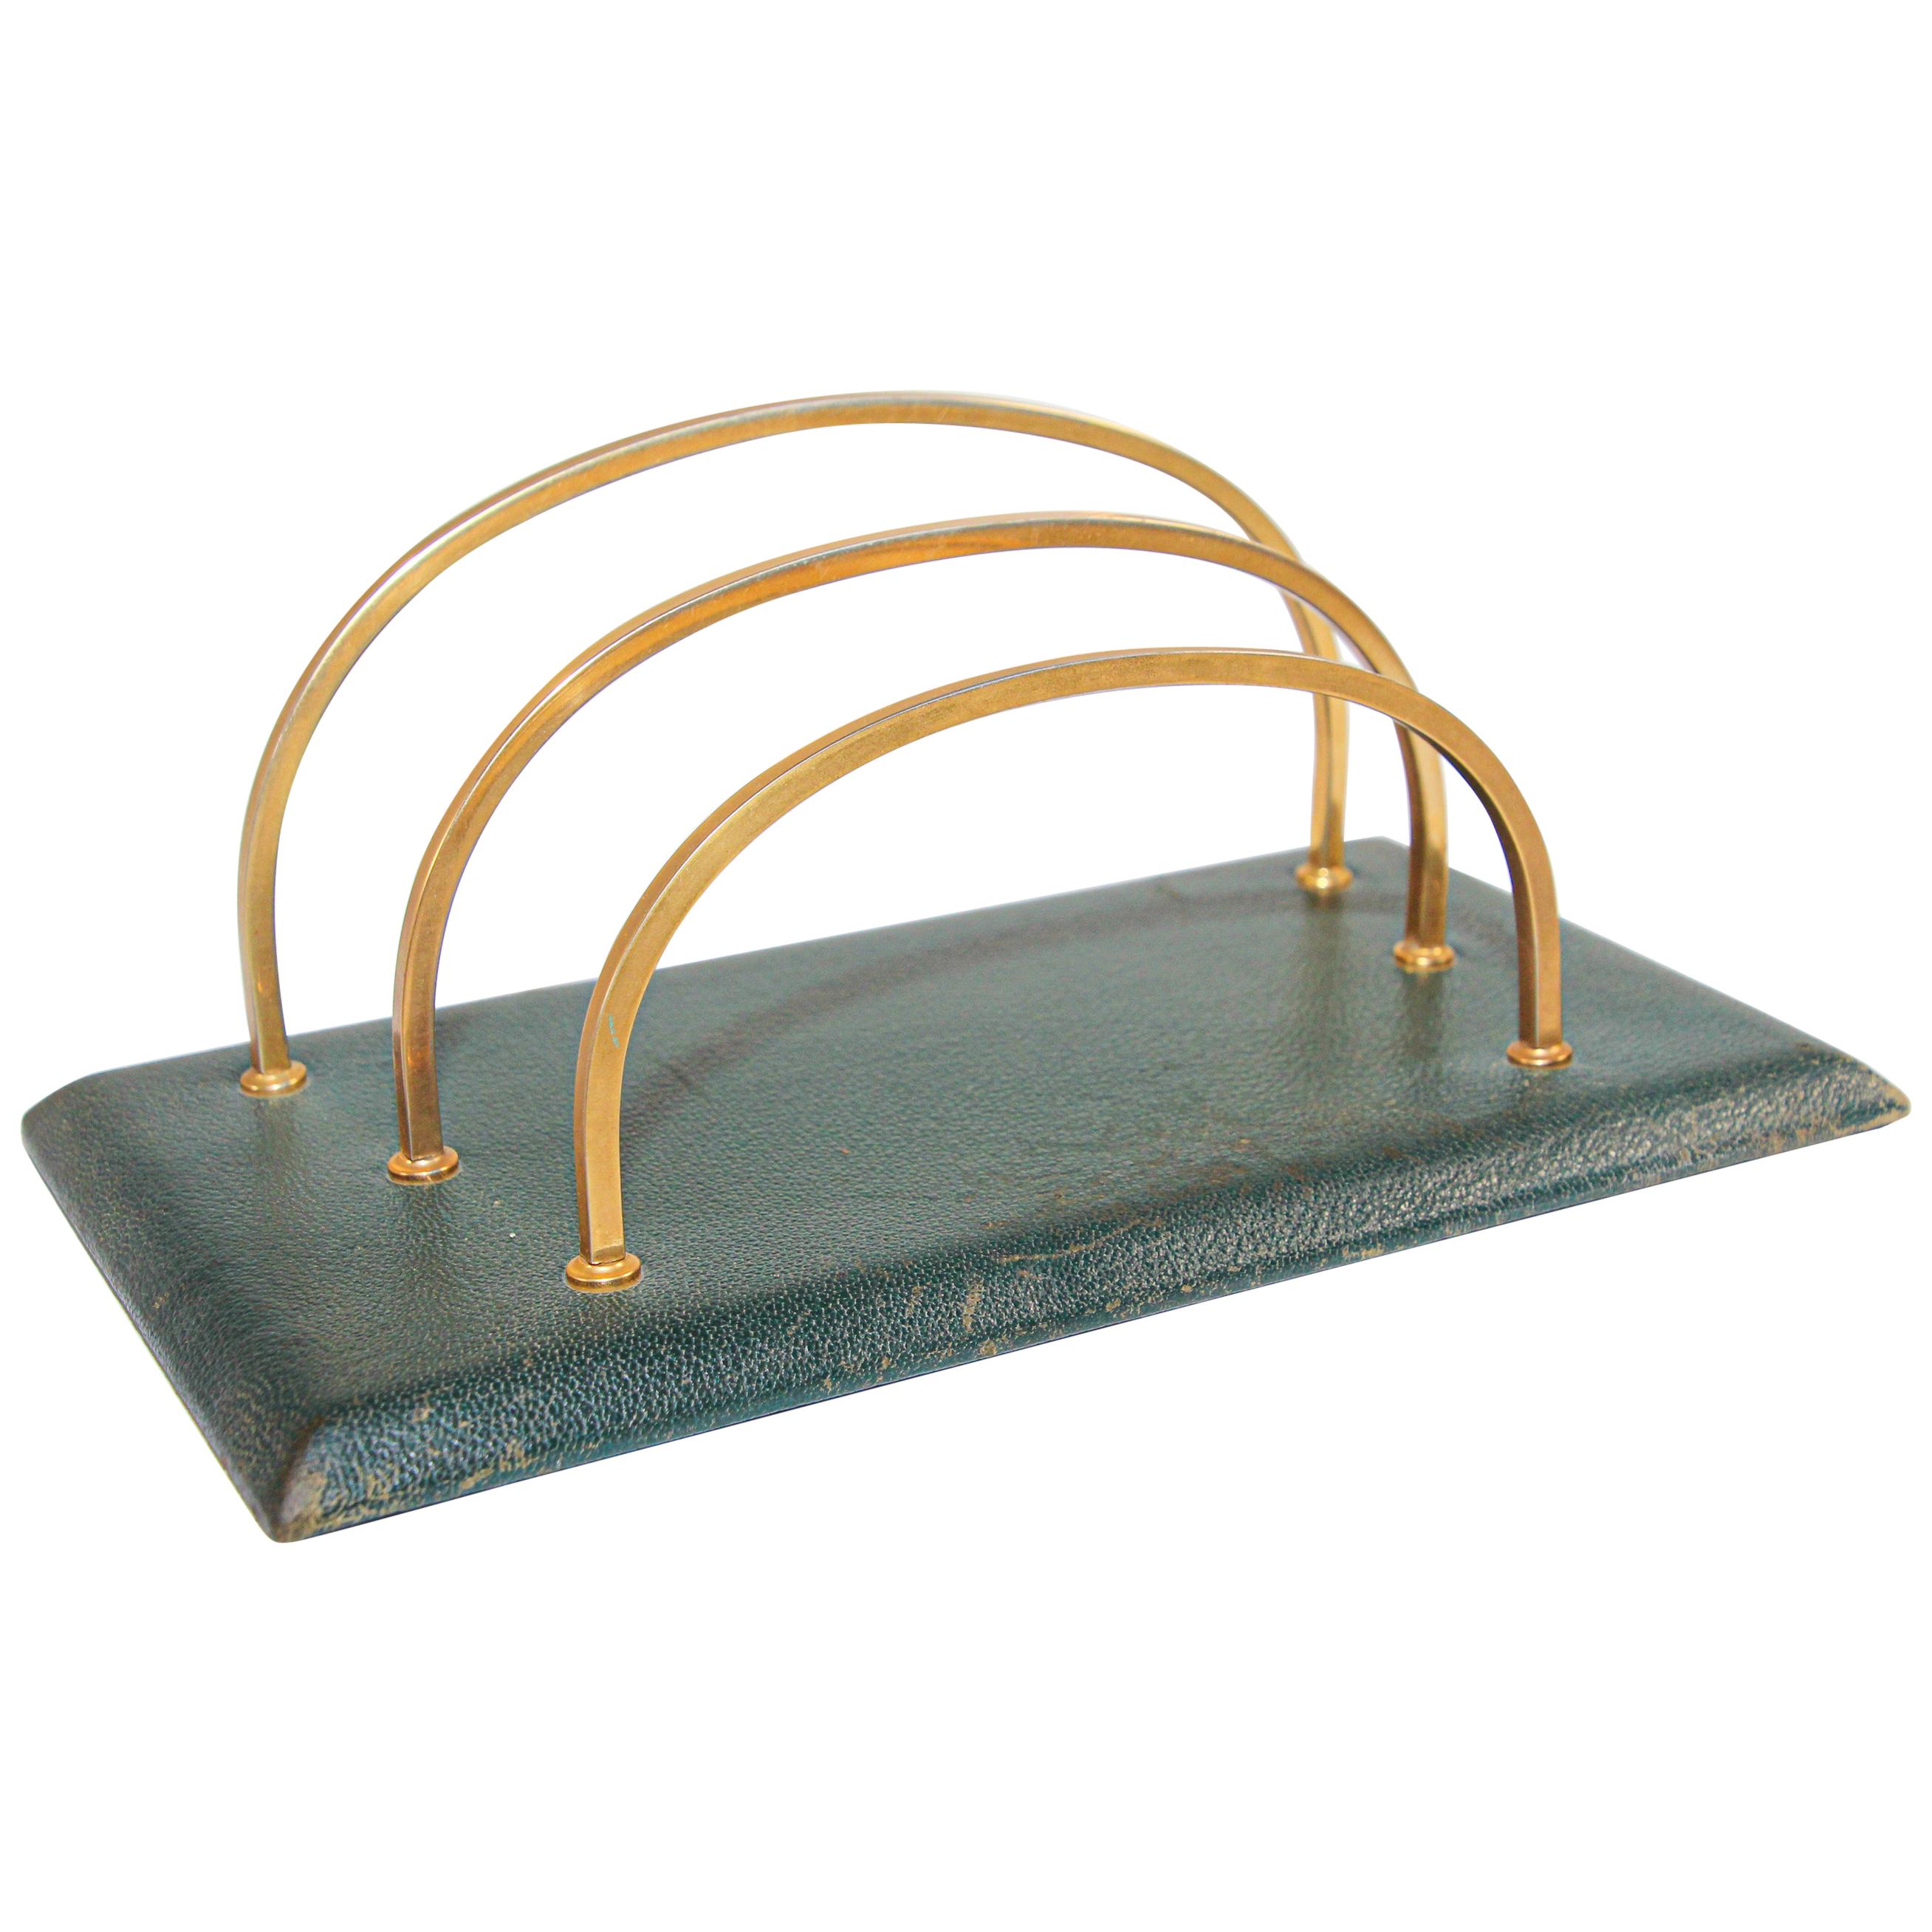 Vintage French Green Leather and Brass Letter Rack